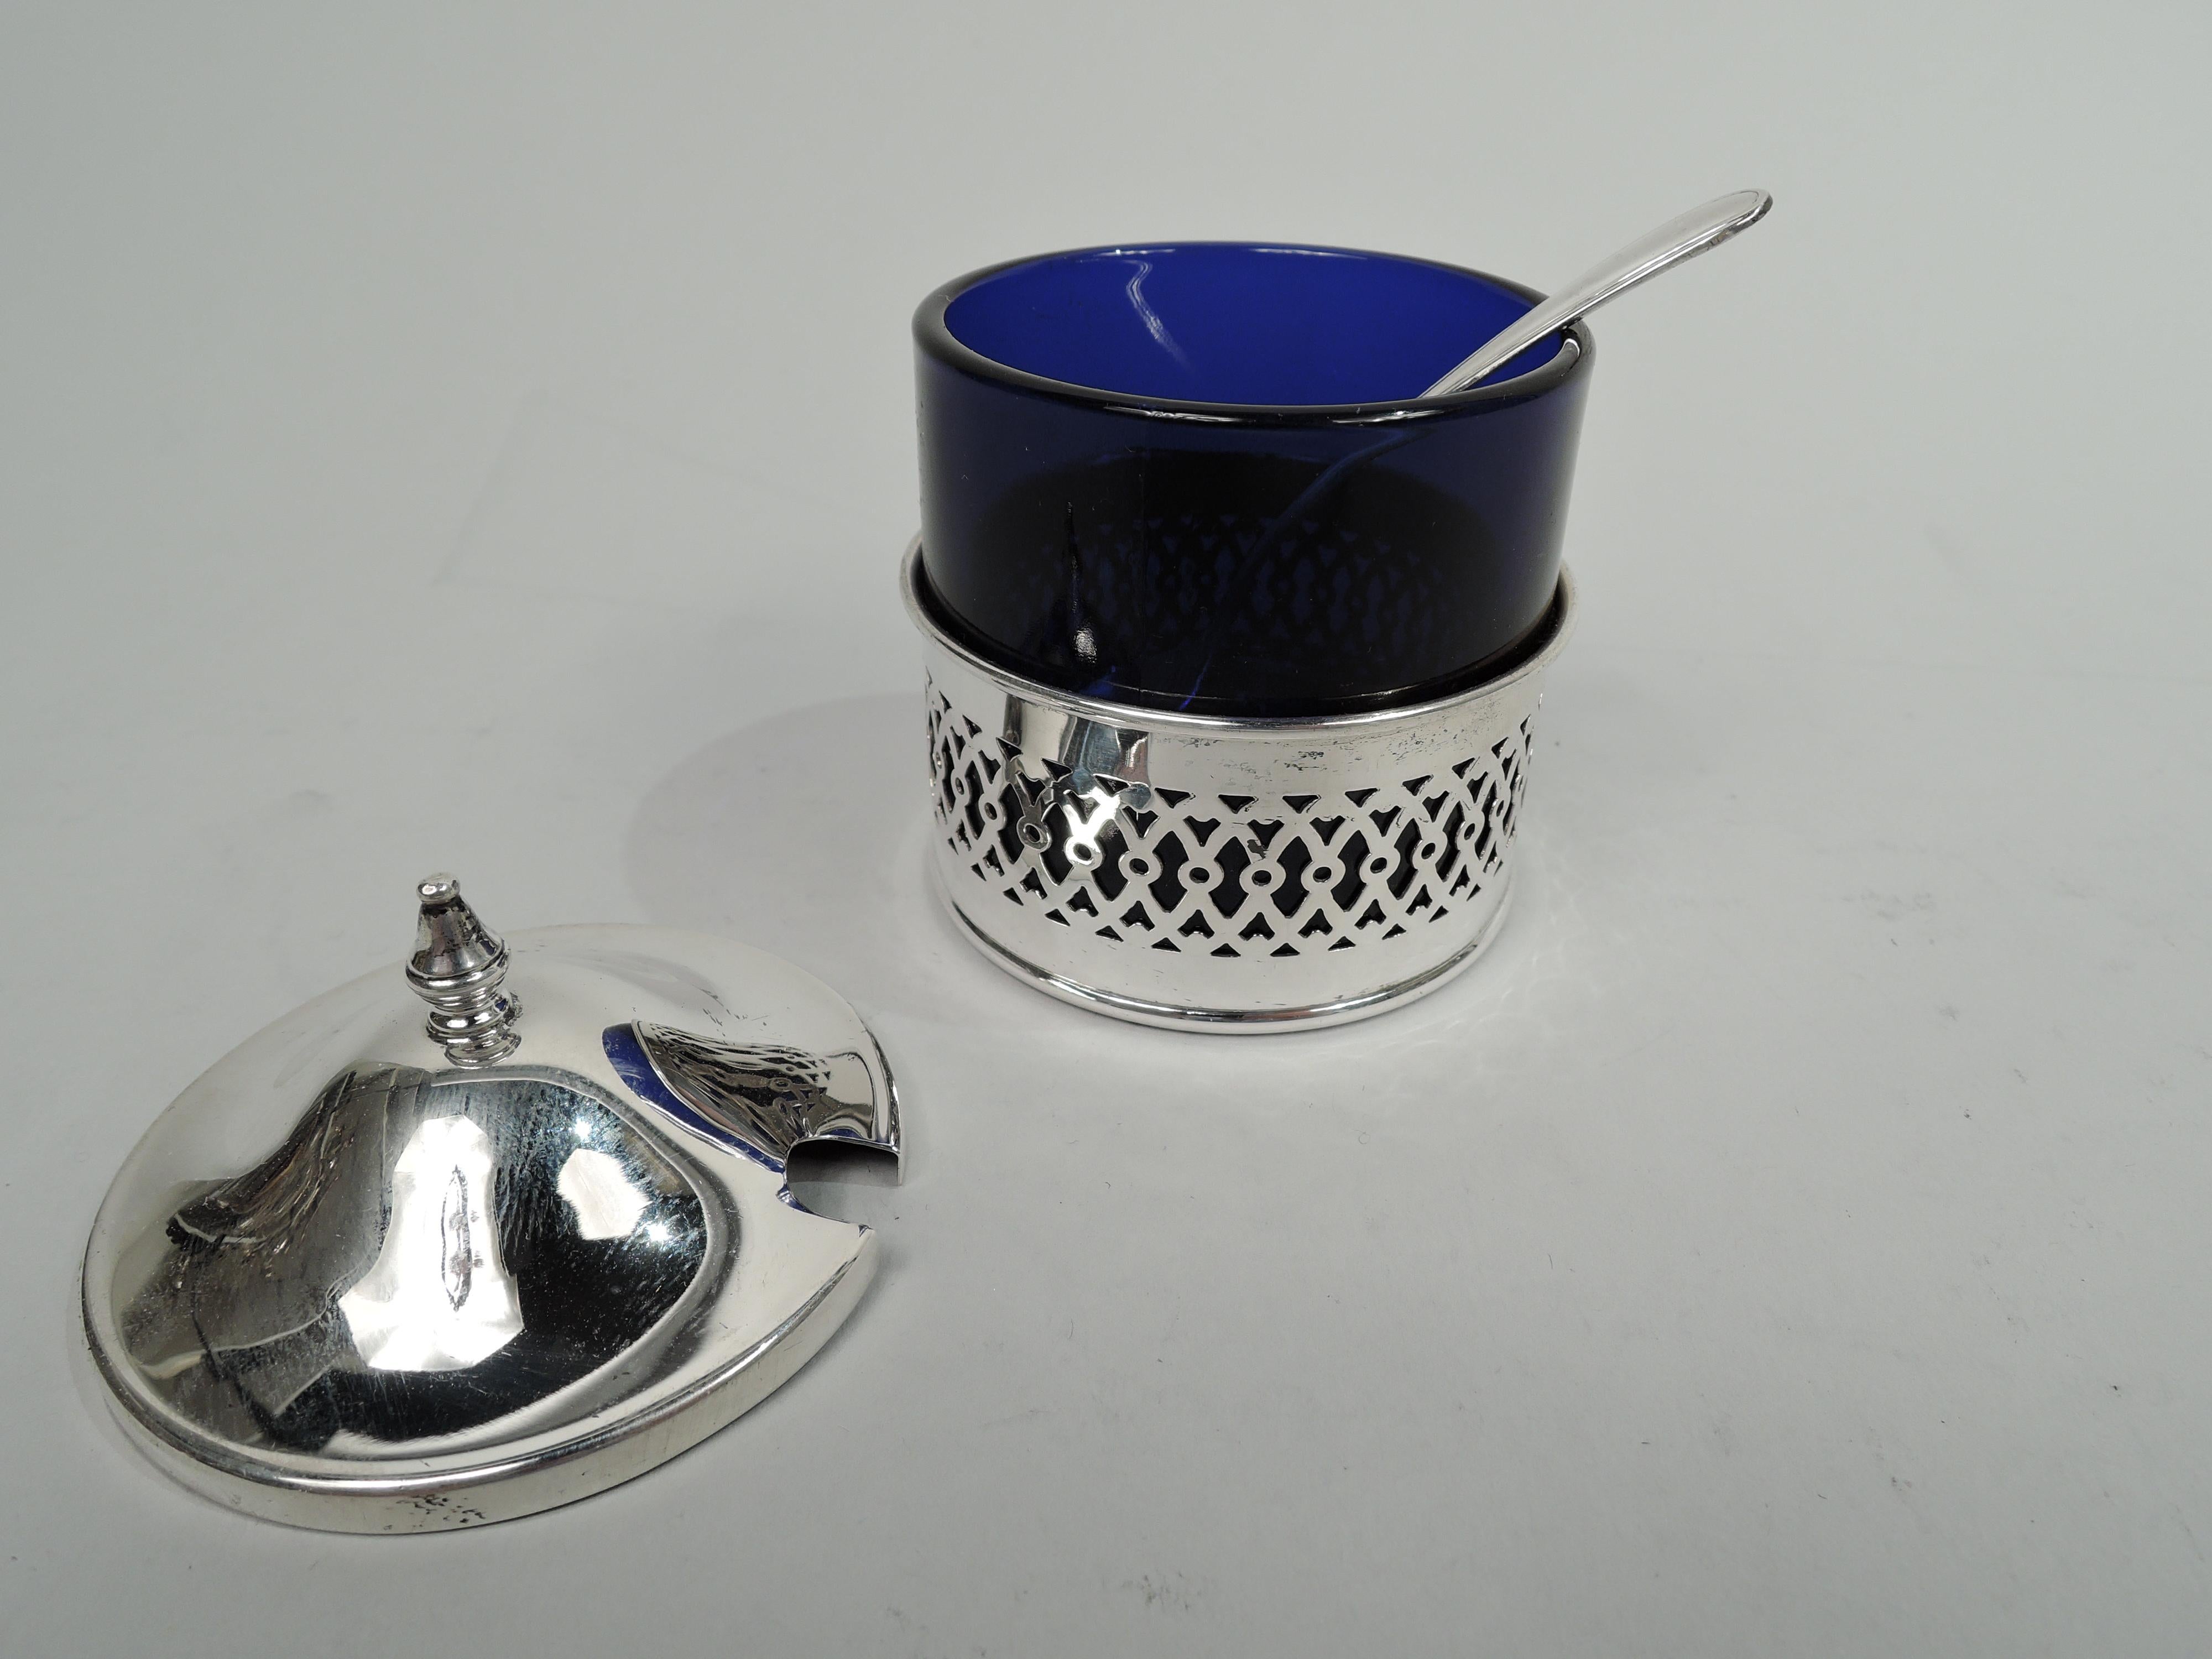 Modern Georgian sterling silver mustard pot. Made by Webster Company in North Attleboro, Mass., ca 1950. Cobalt glass bowl set in sterling silver base with pierced ornamental band. Cover raised with vasiform finial. With spoon. Base and spoon marked